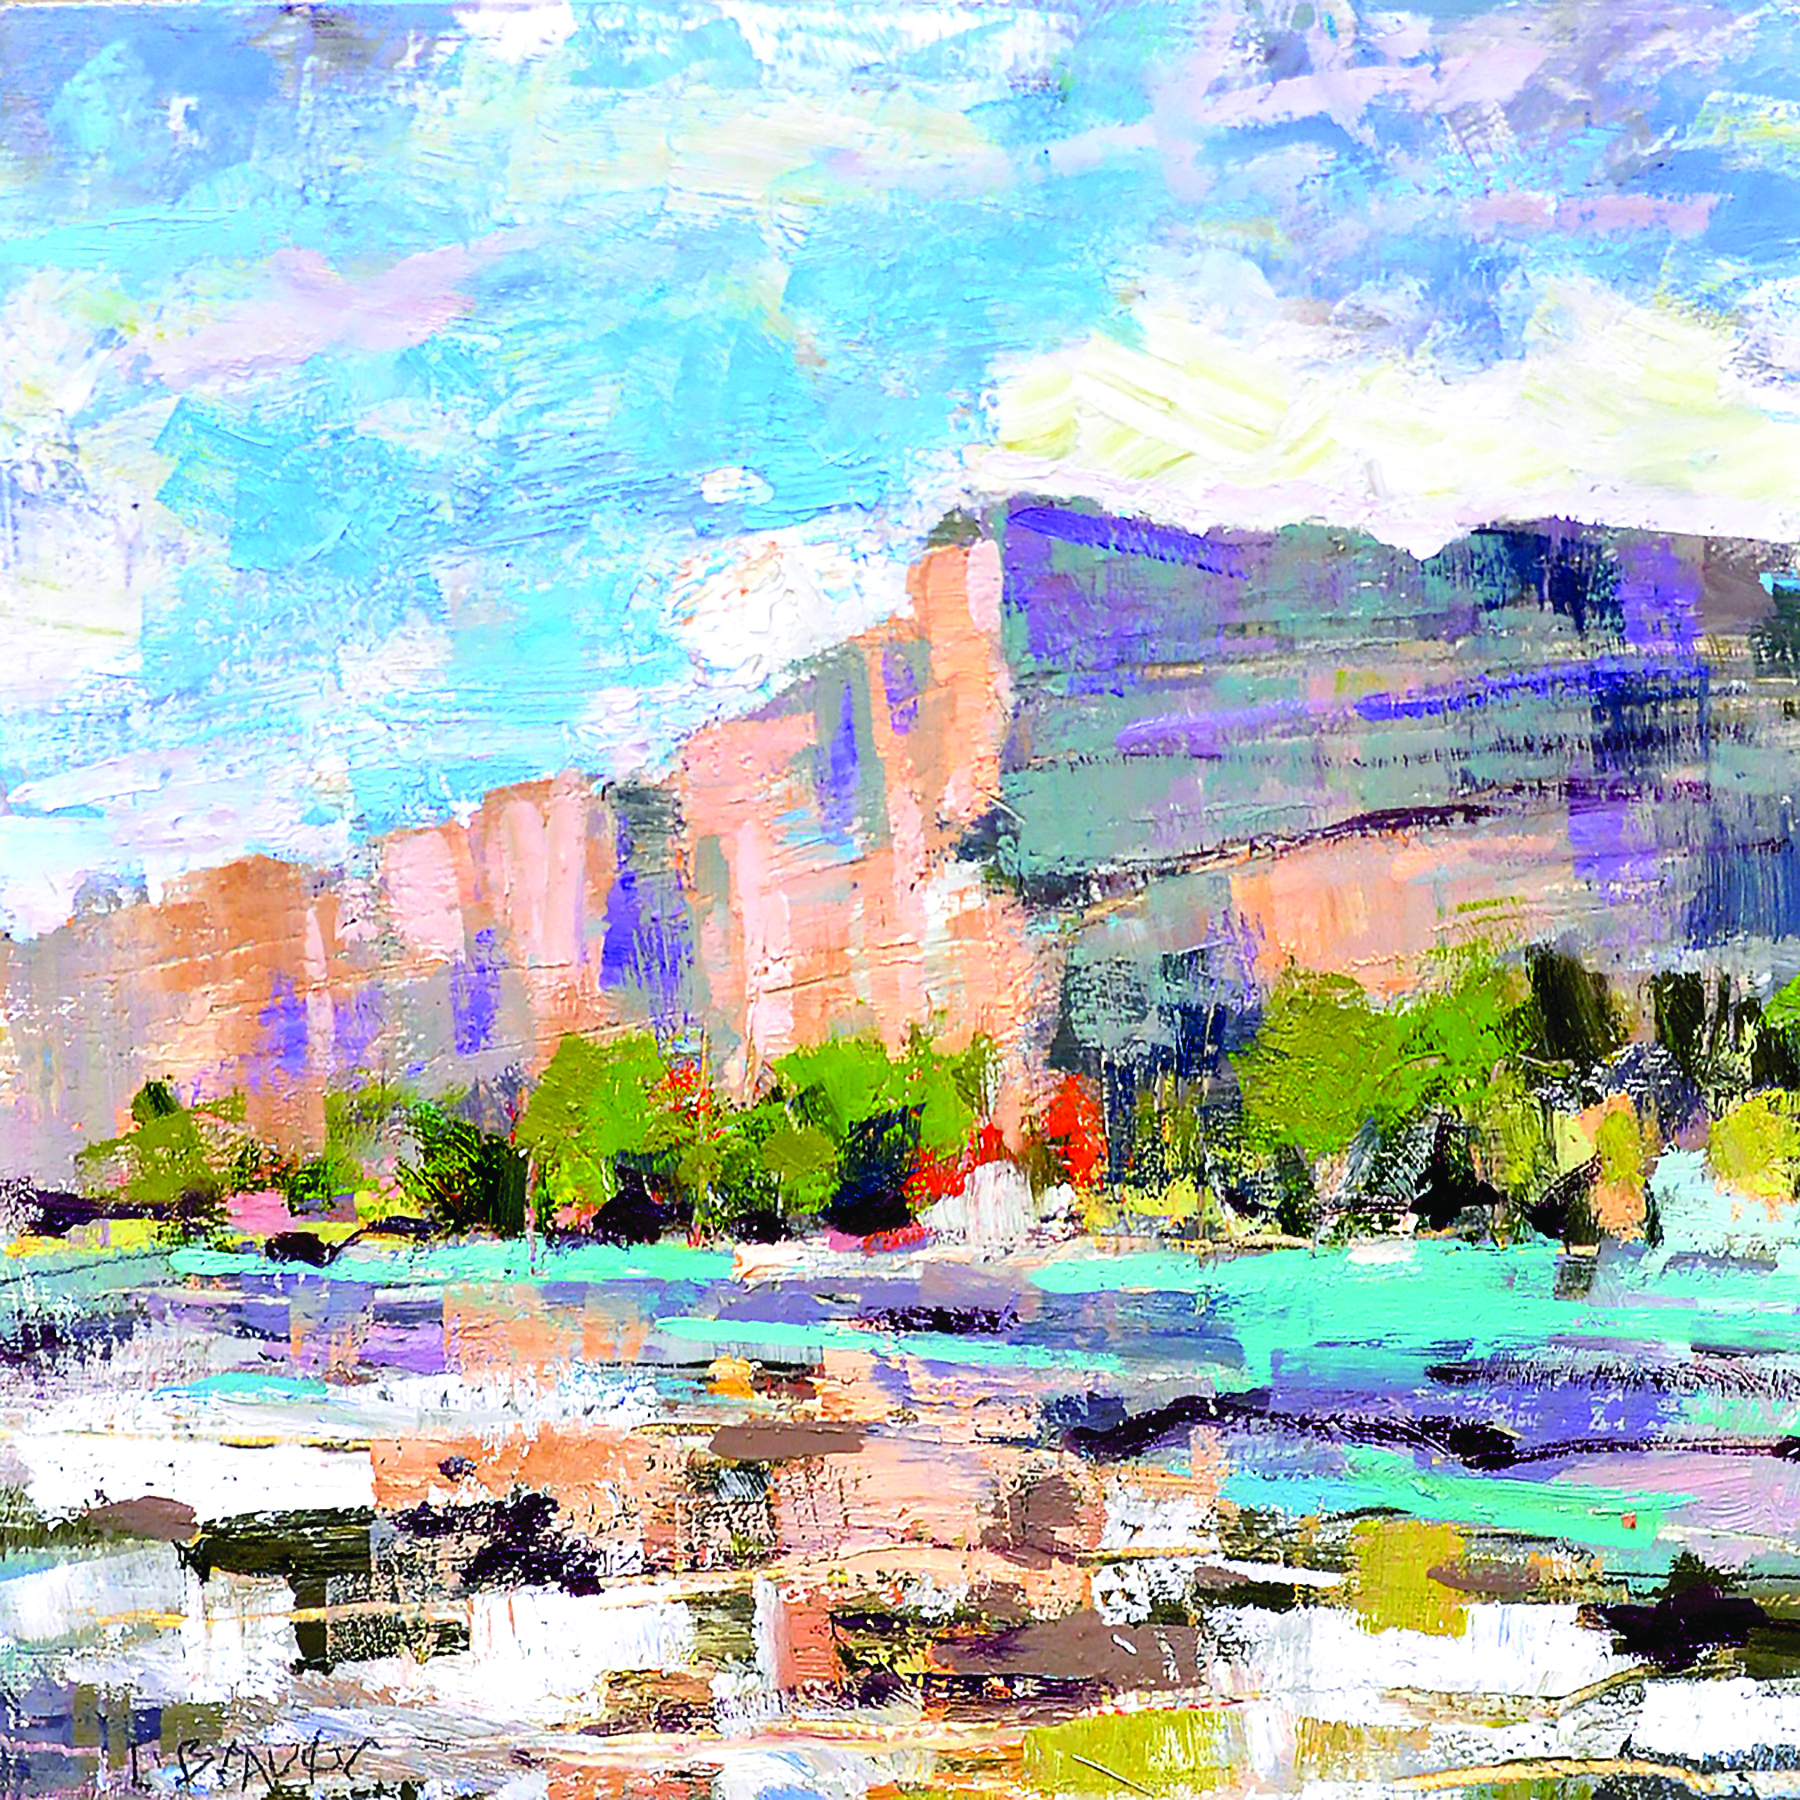 Lon Brauer, "Terlingua River," 2021, oil, 12 x 12 in., available from artist, plein air